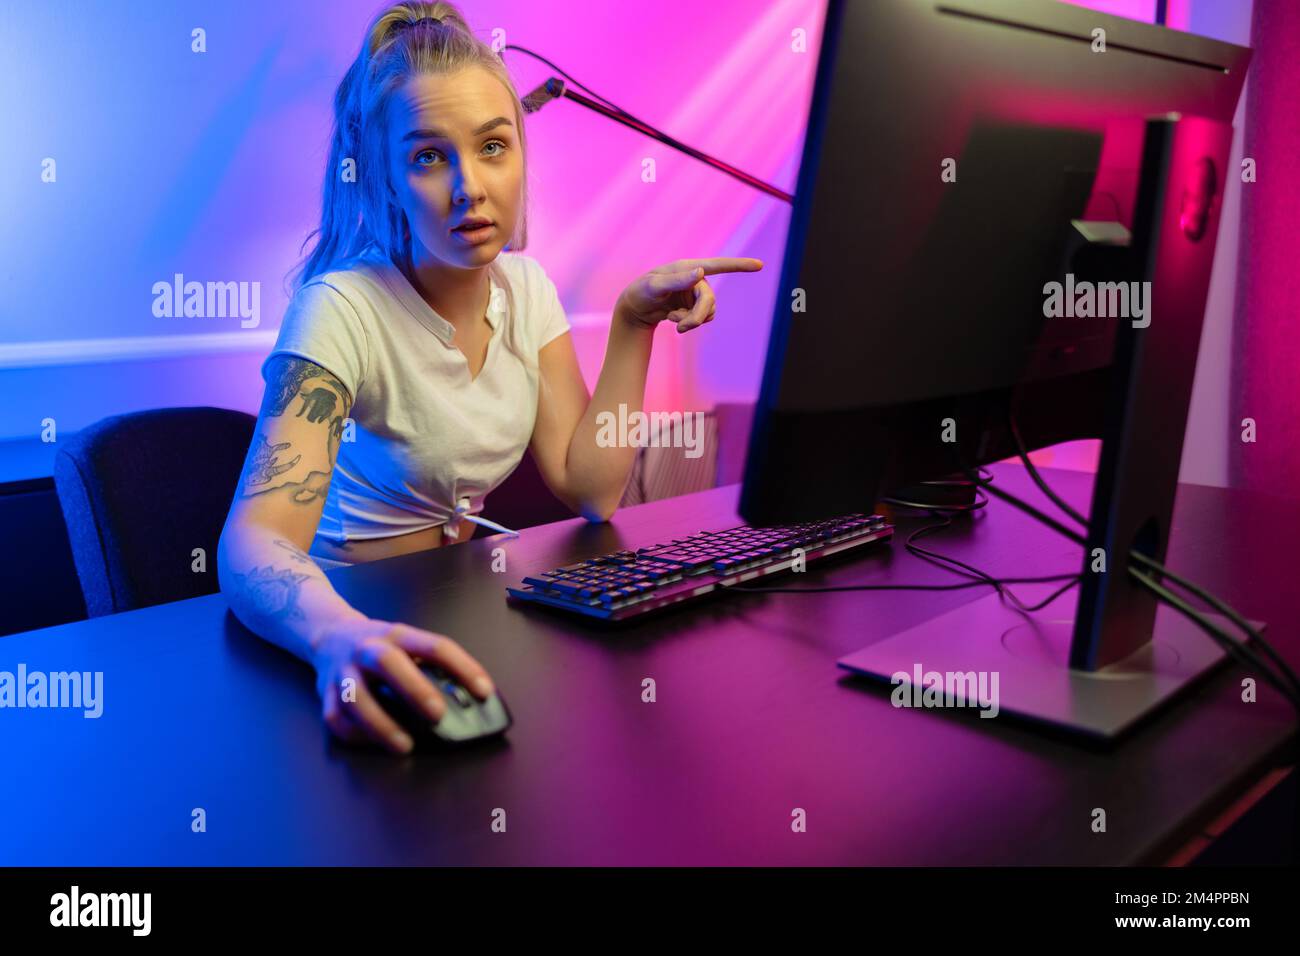 Professional esport gamer girl streaming and losing online video game on PC Stock Photo